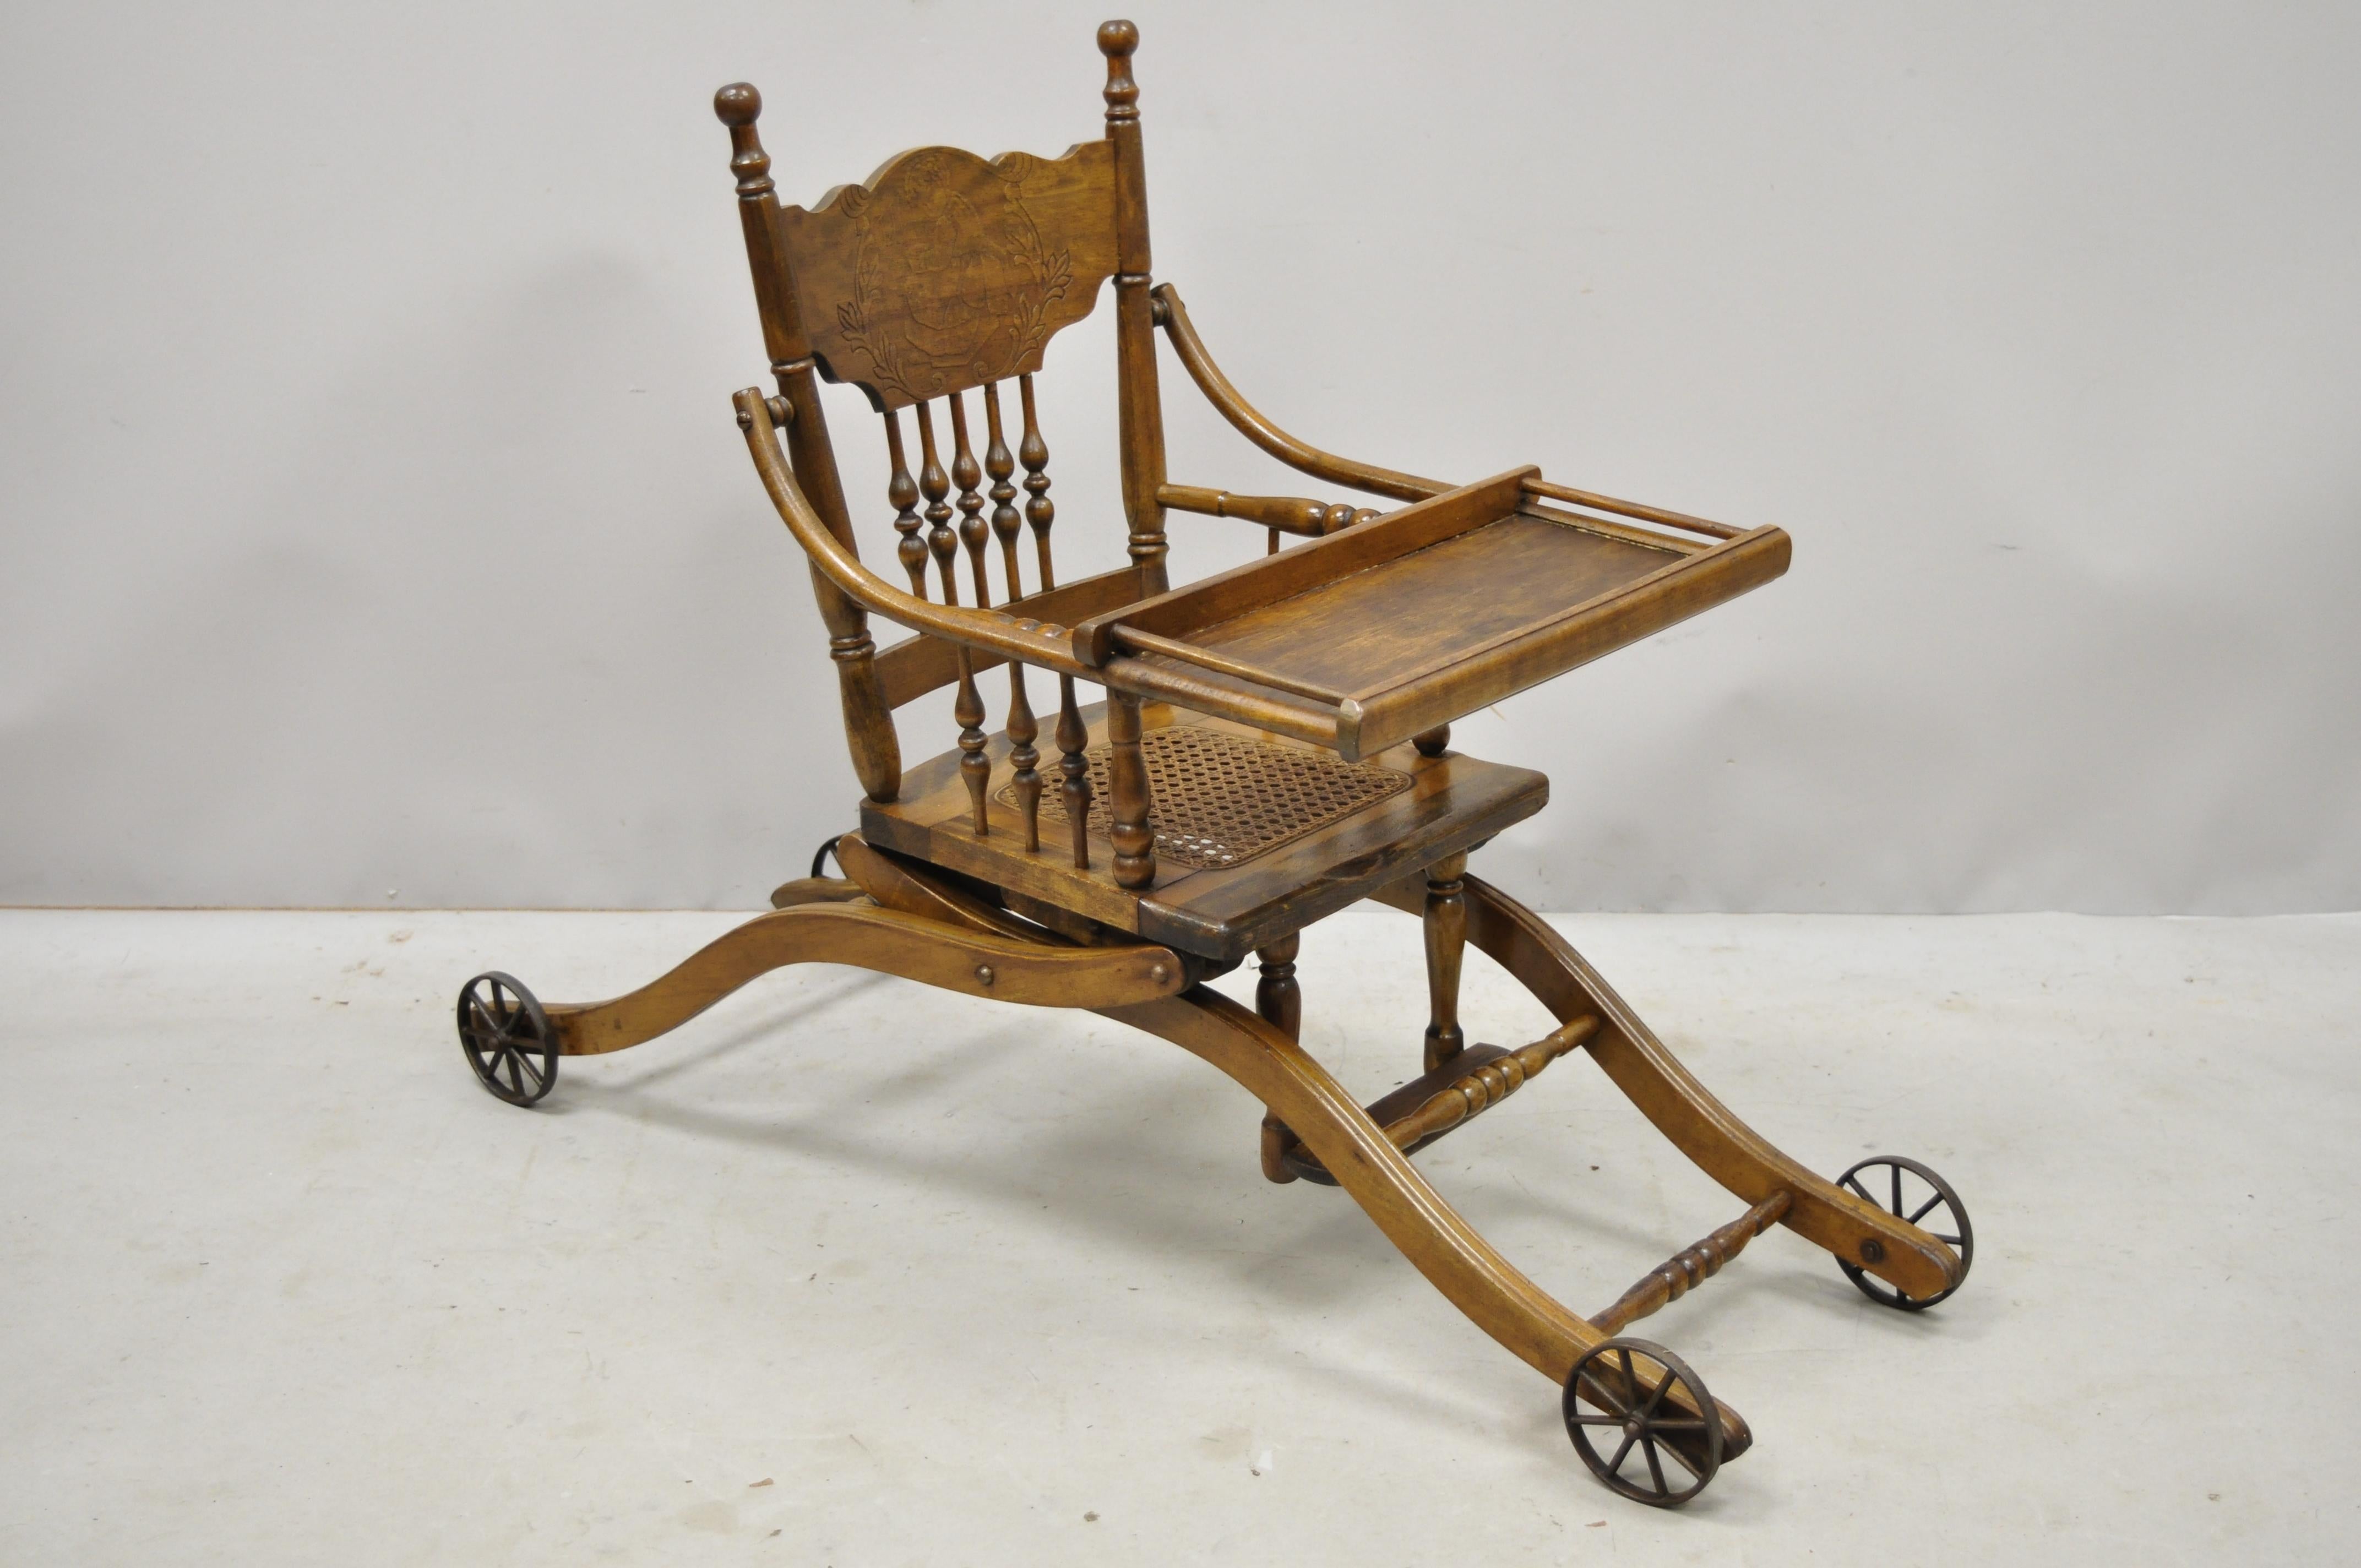 Antique oak convertible pressed back Victorian high chair baby stroller. Item features convertible frame, cast iron wheels, beautiful wood grain, very nice antique item, circa 1900. Measurements: Up: 40.5